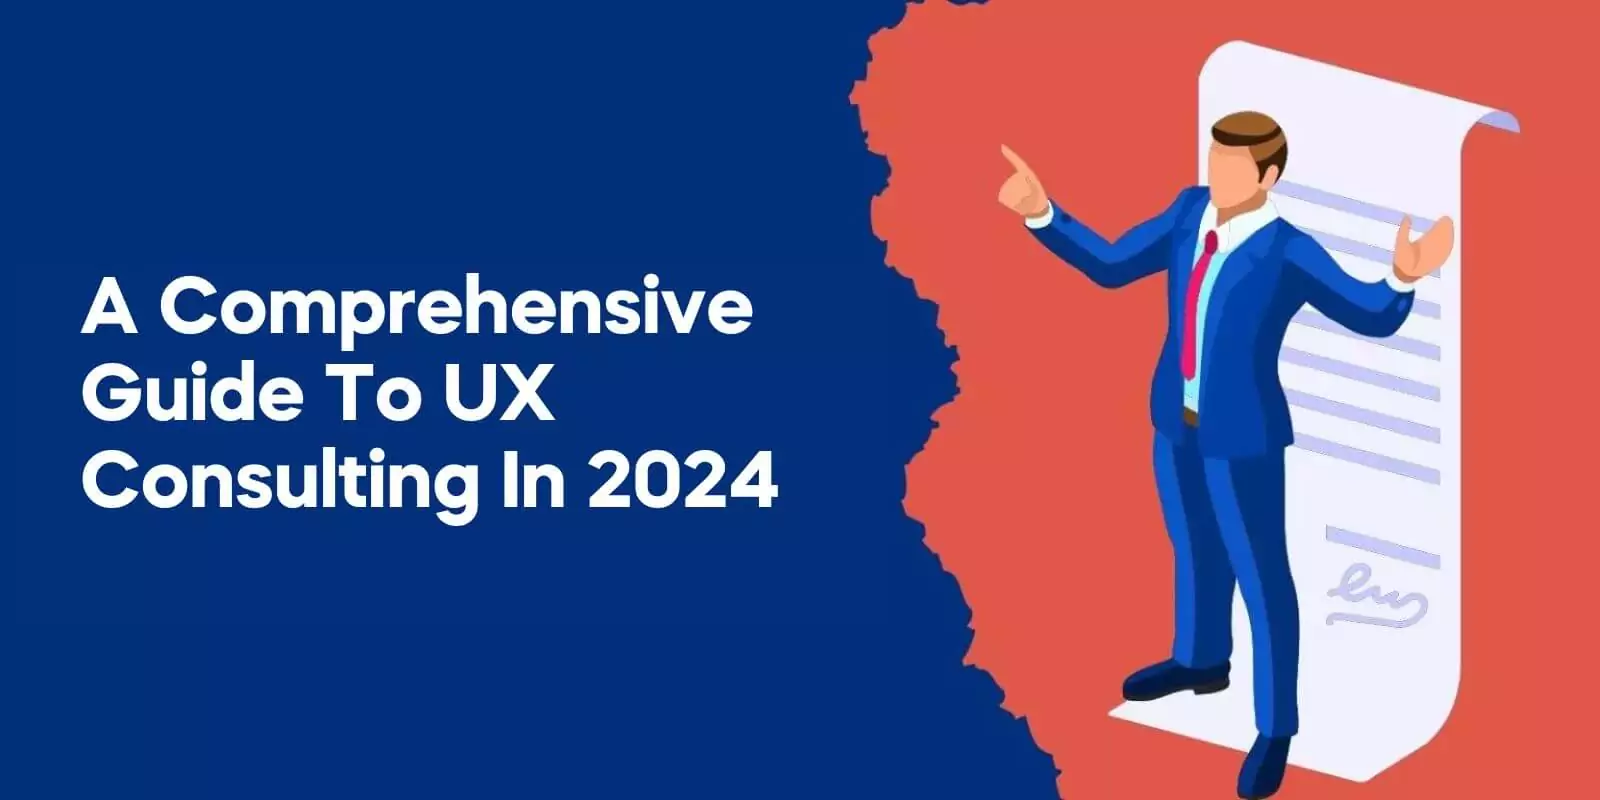 A Comprehensive Guide to UX Consulting in 2024